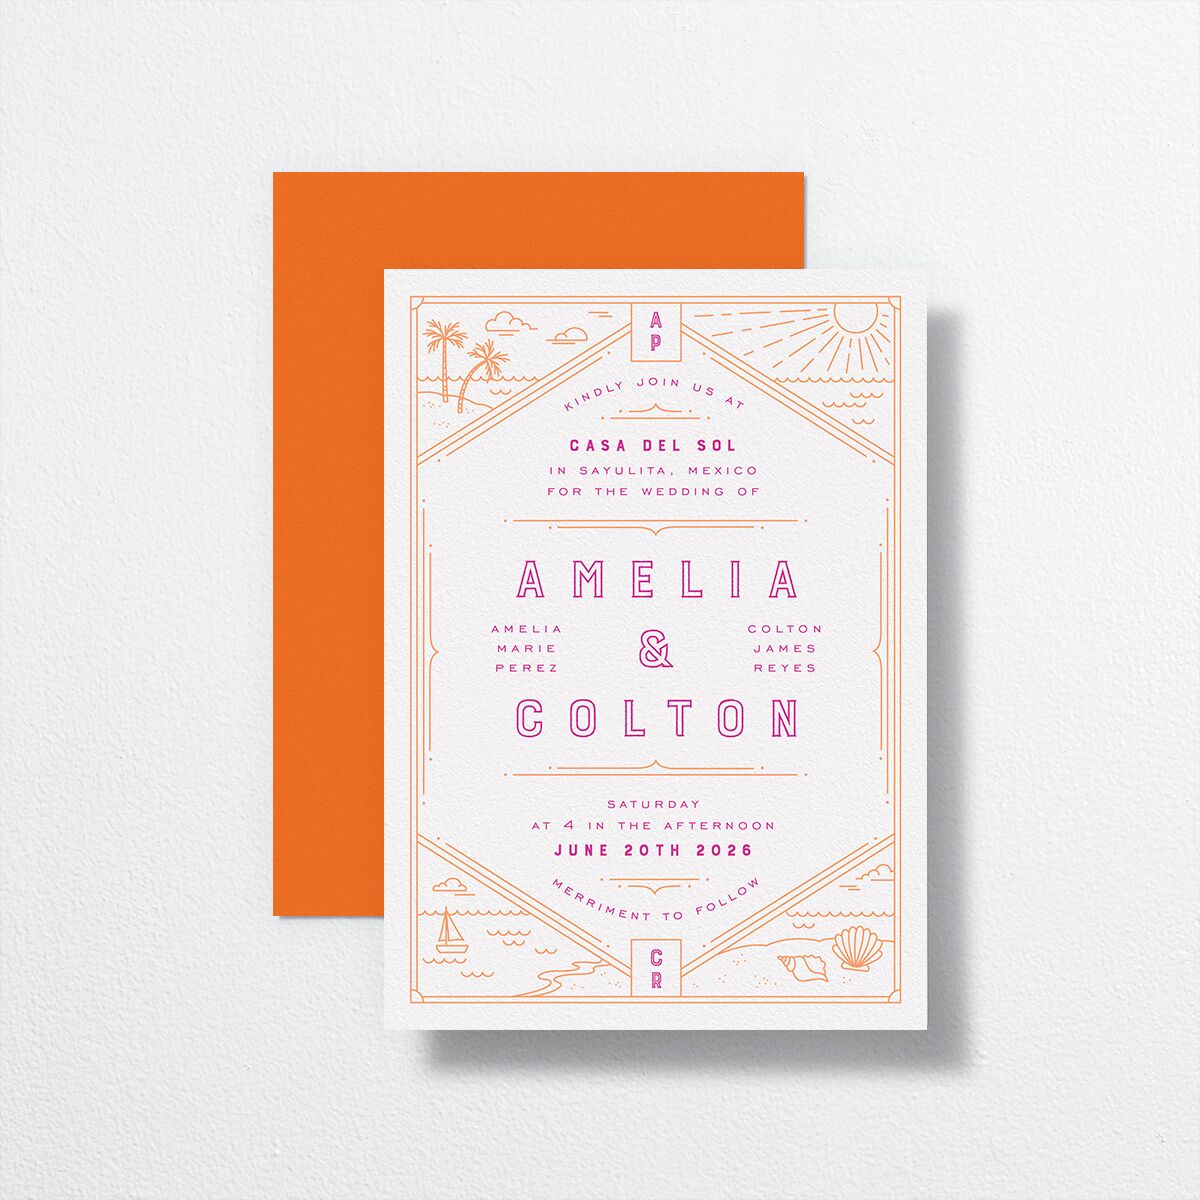 Iconic Beach Wedding Invitations front-and-back in orange